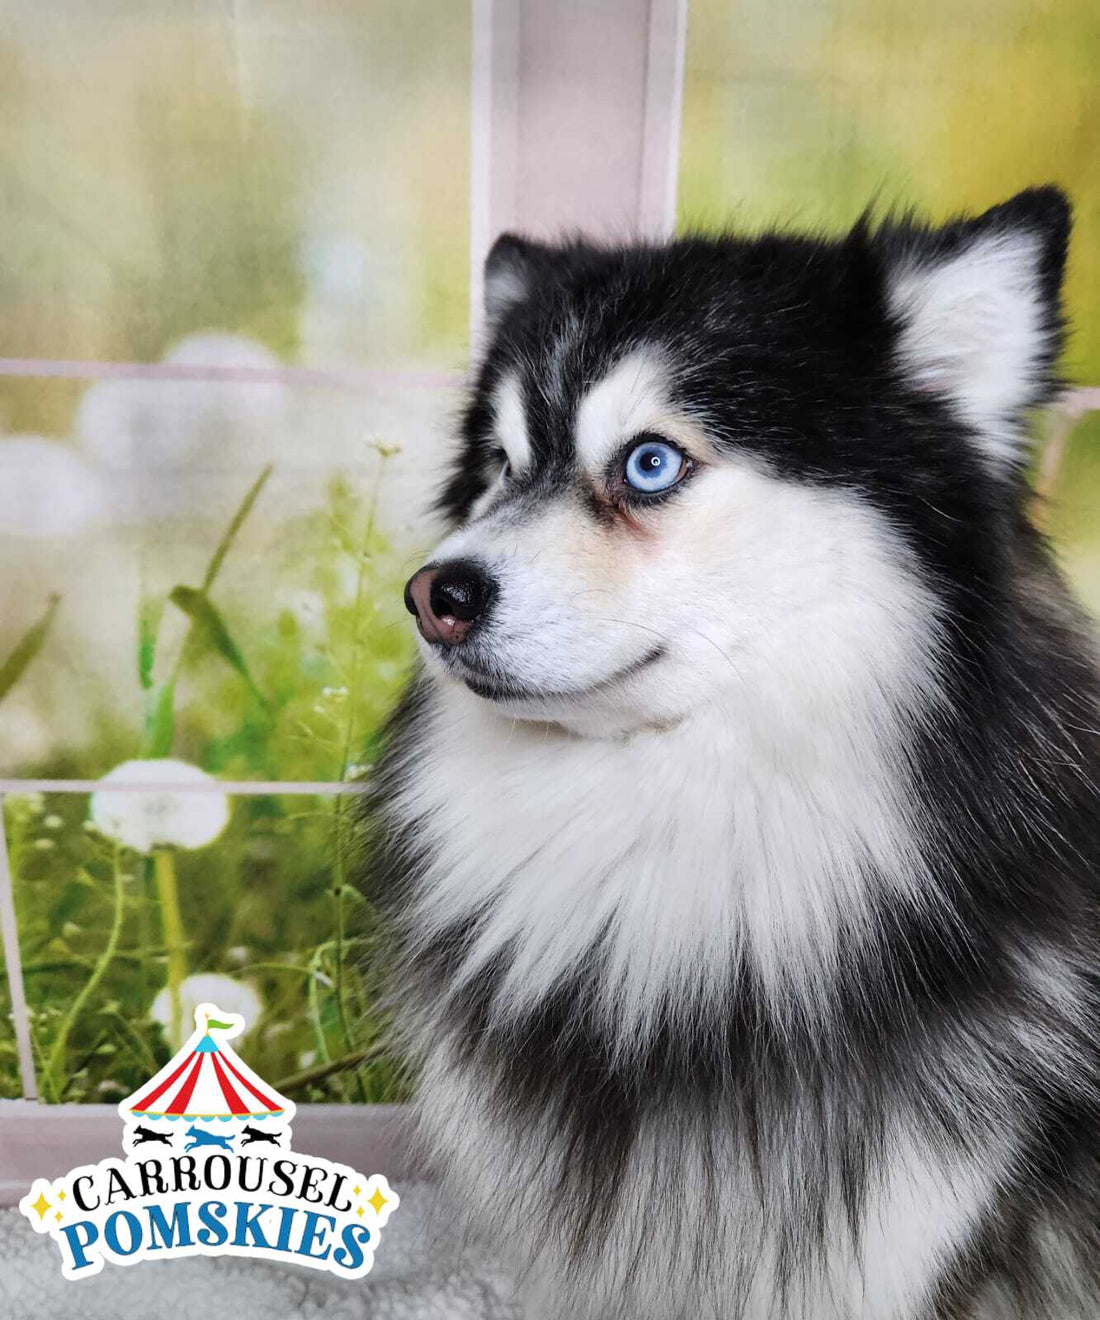 The Pomsky is the perfect family dog!